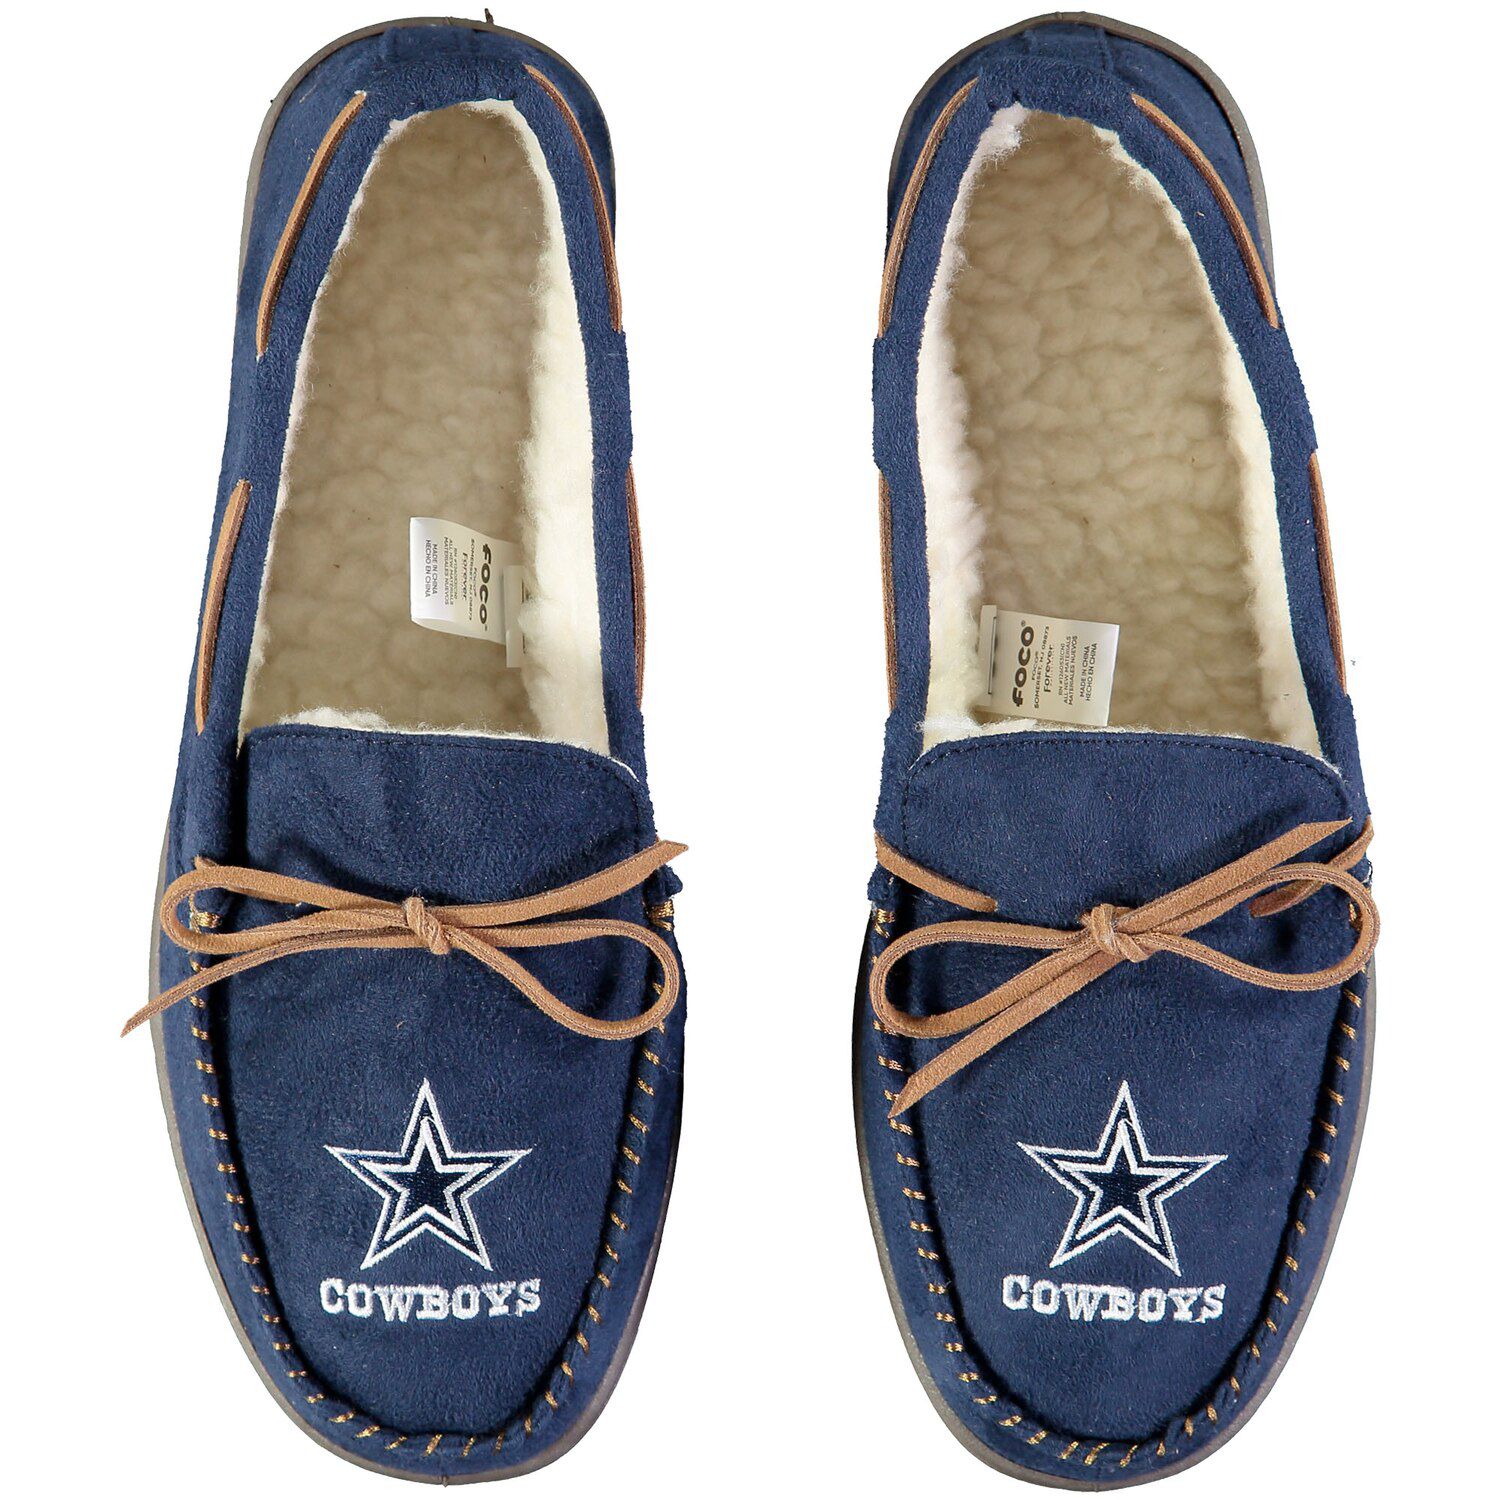 cowboys moccasin slippers